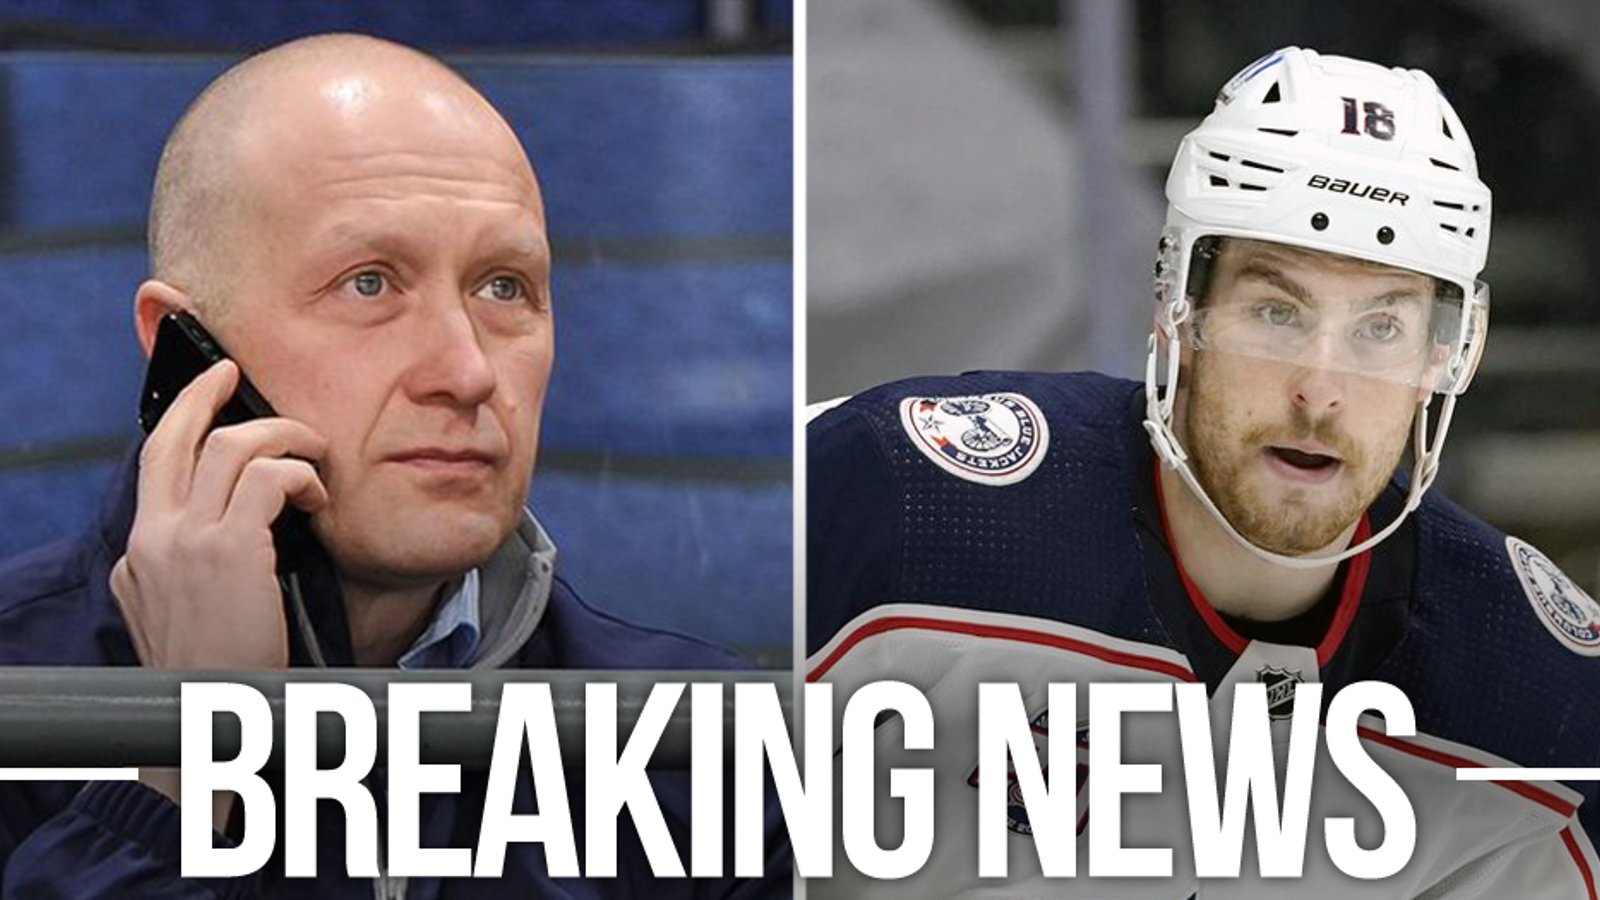 Columbus GM Kekalainen calls Dubois a liar, “I wish that he would tell the truth about why he wanted out”